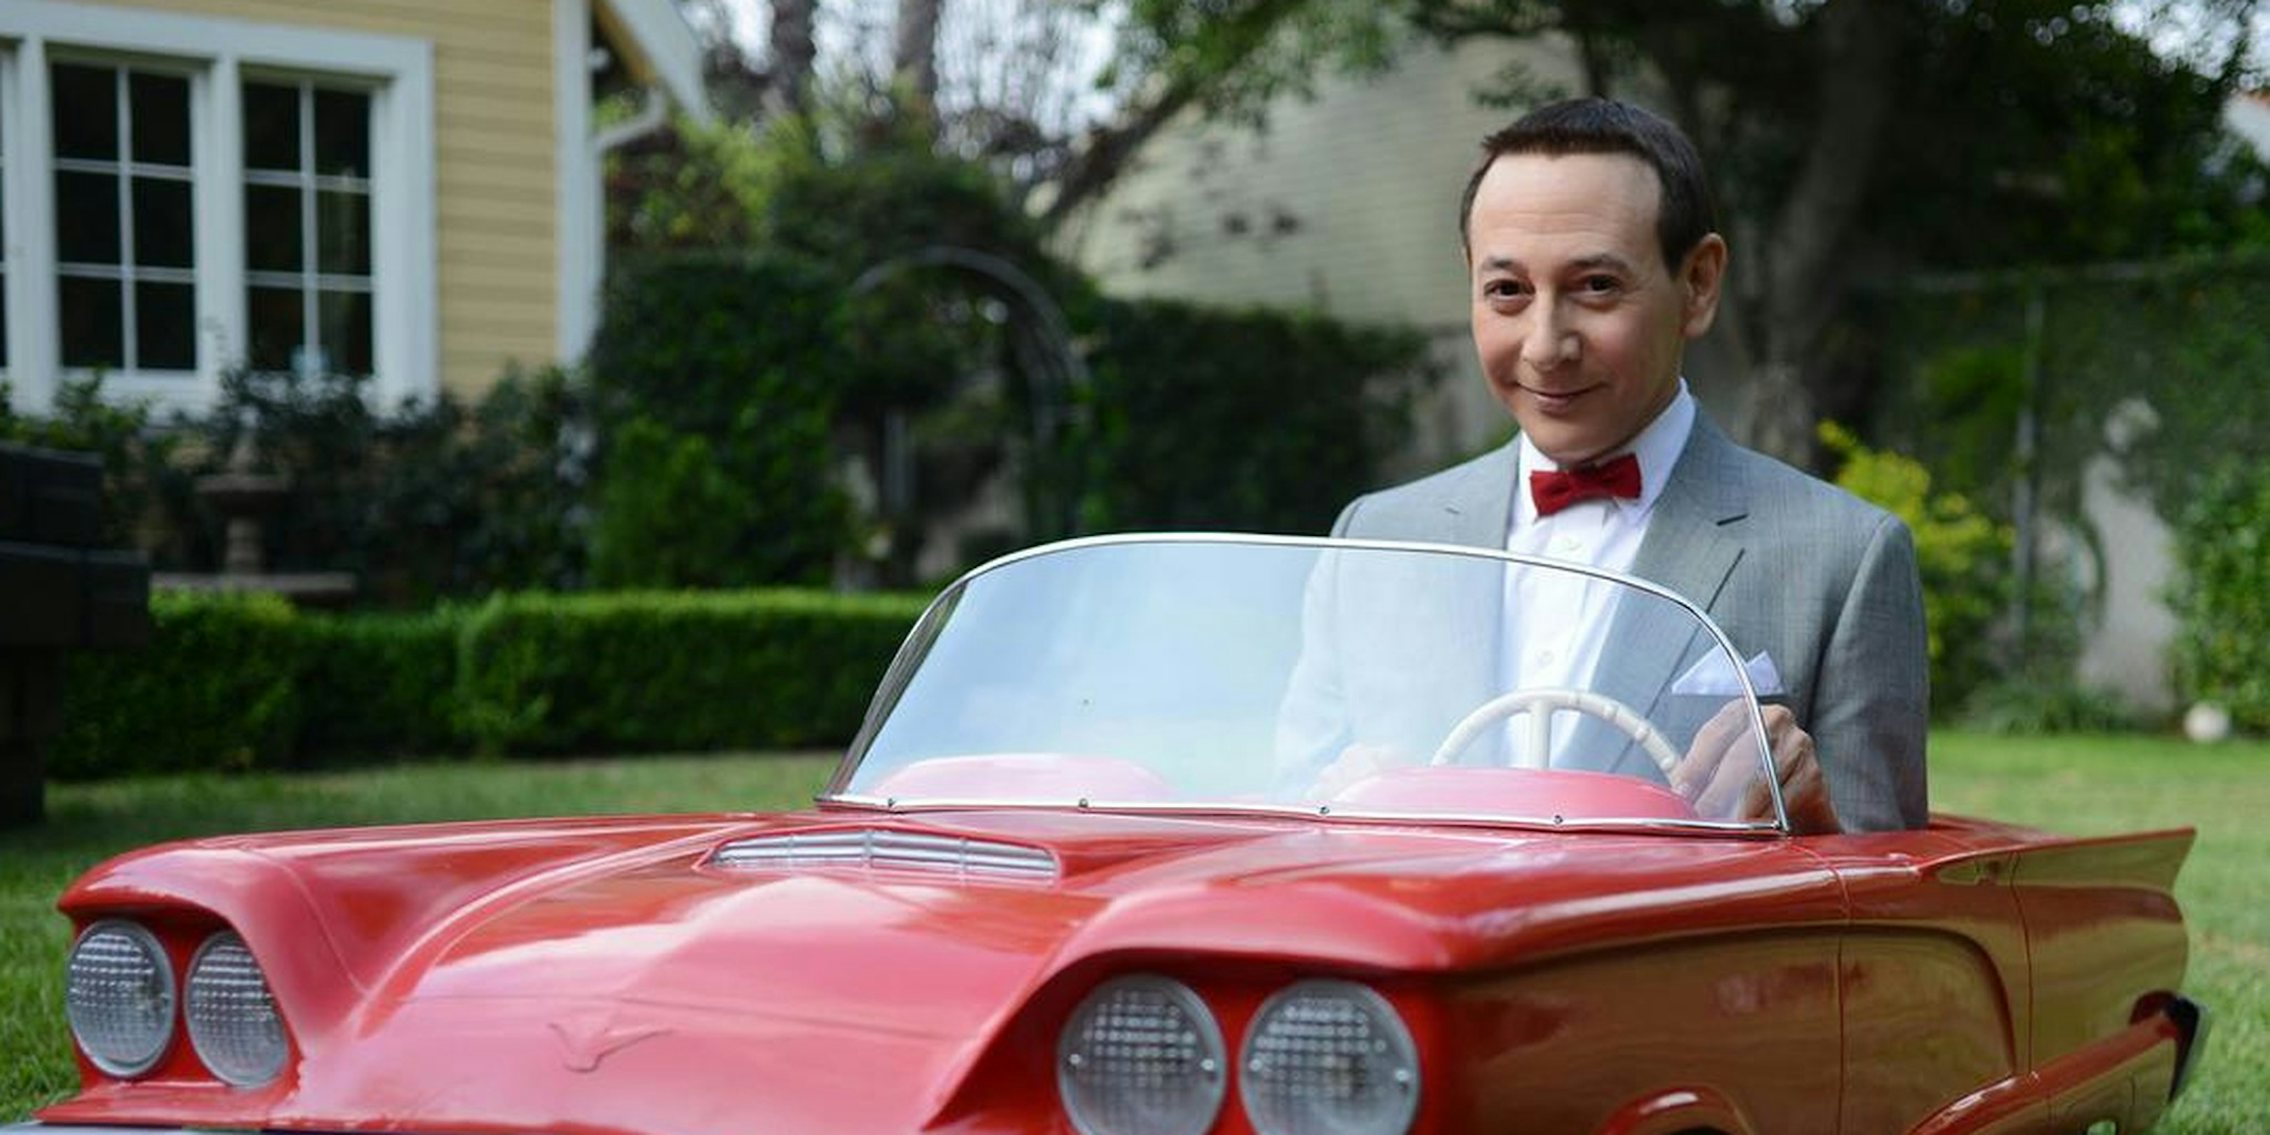 'Pee-wee's Big Holiday' is coming to Netflix in March